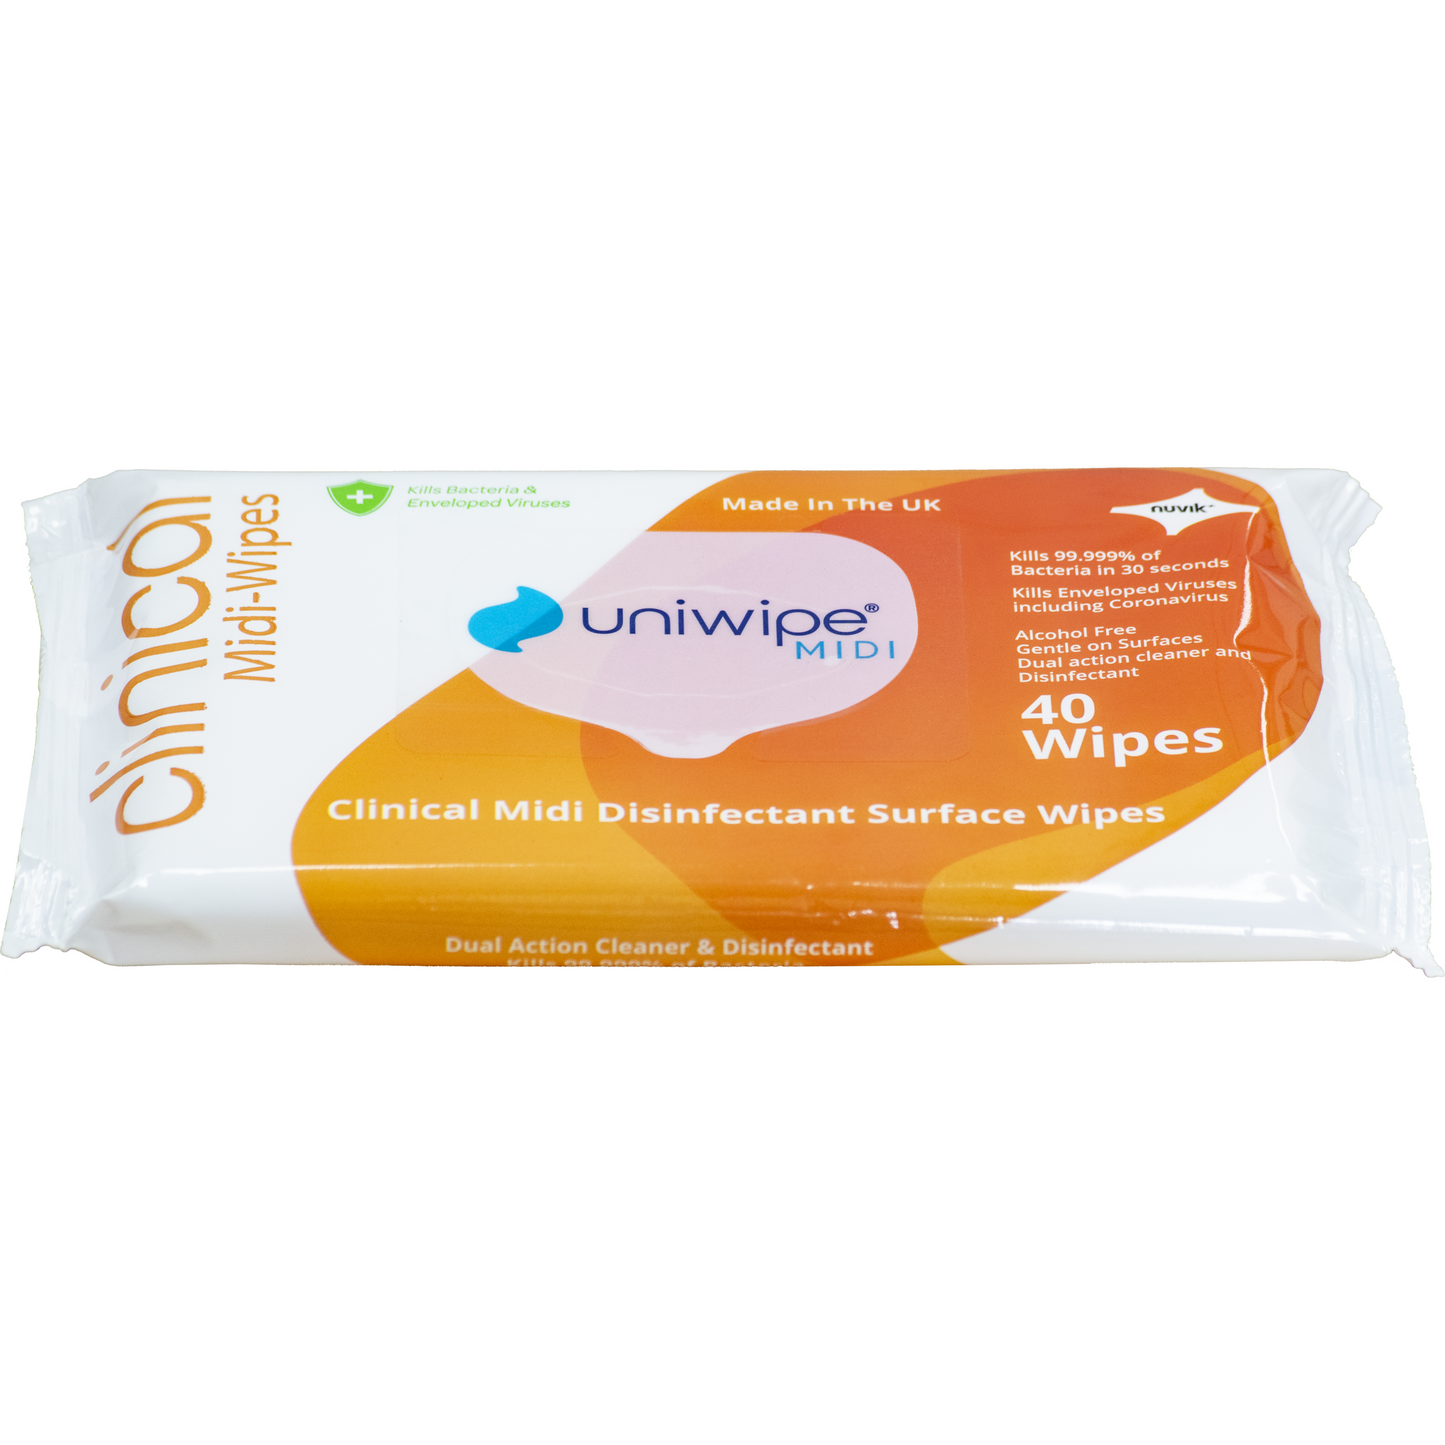 Uniwipe Clinical Surface Disinfectant Wipes X 40 -CLEARANCE SHORT EXPIRIY DATE